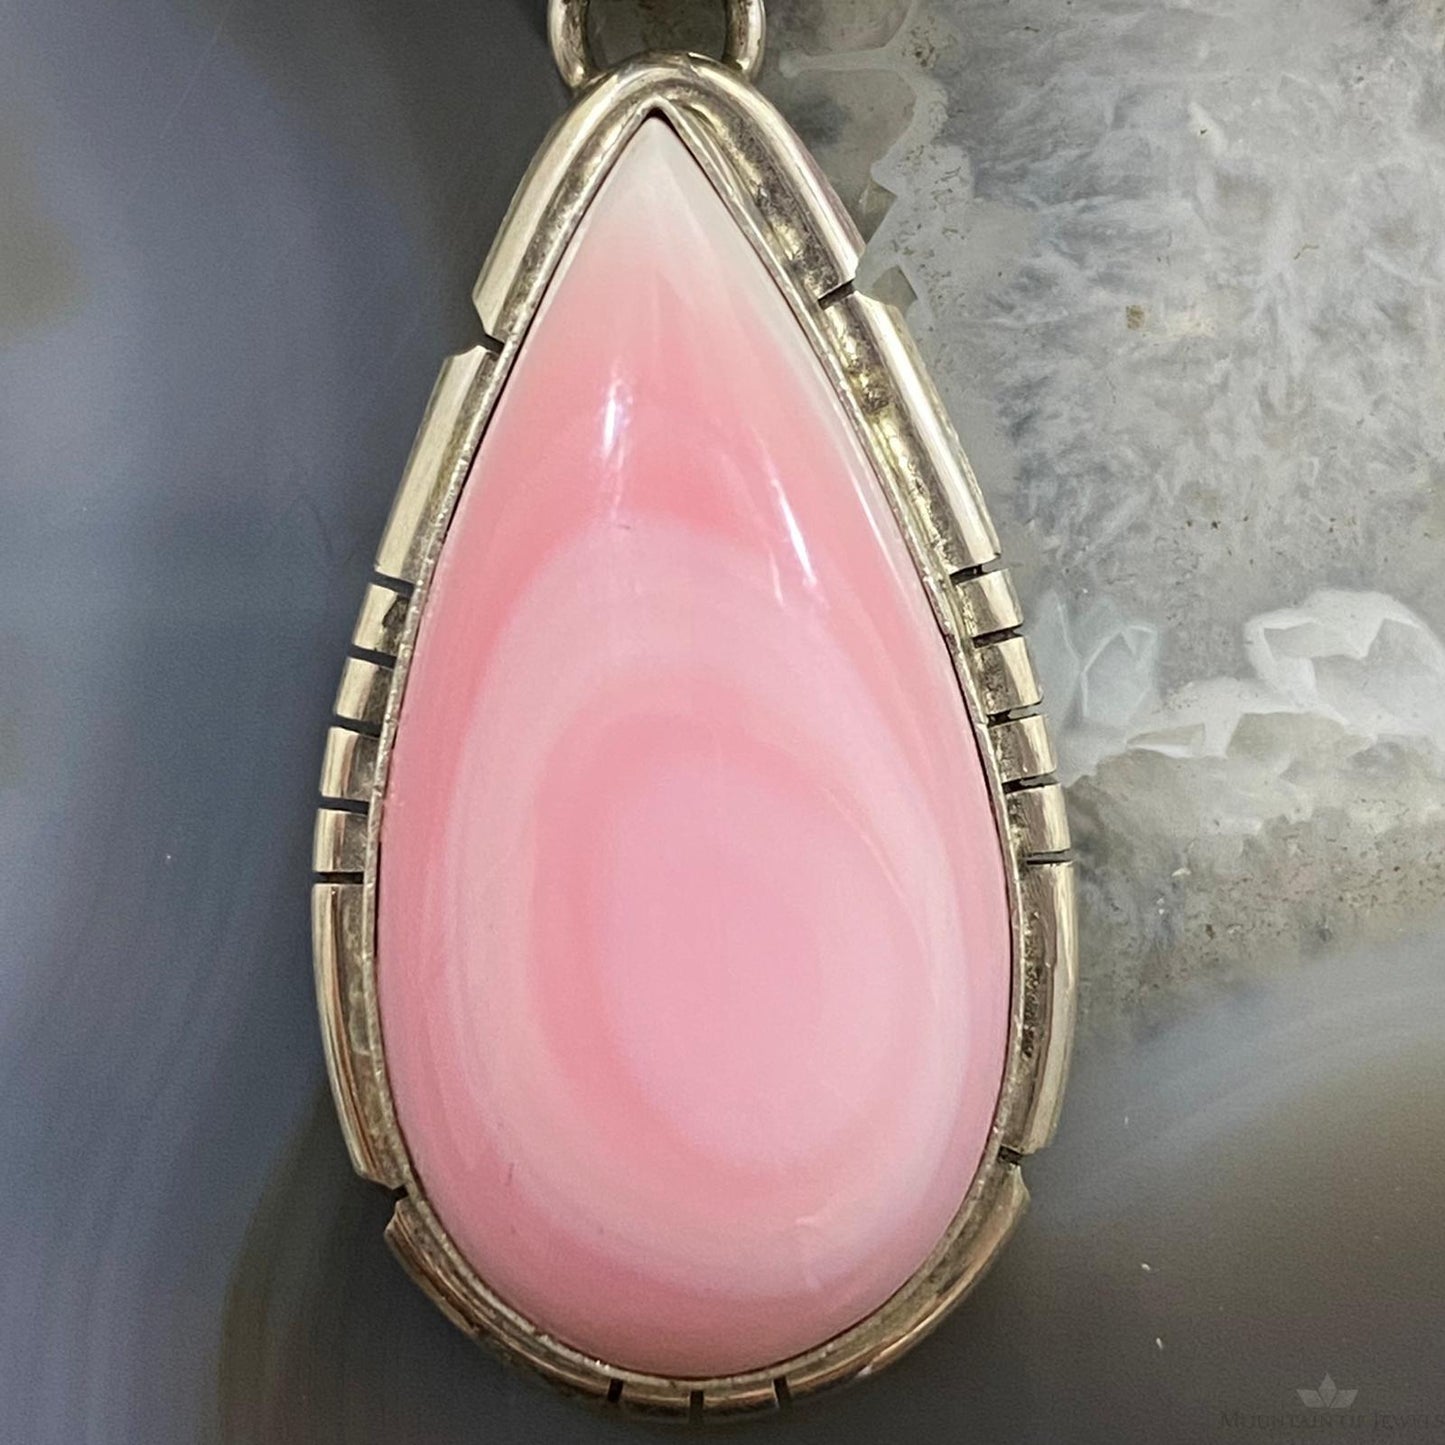 Samson Edsitty Native American Sterling Silver Pink Conch Pendant For Women #2 - Mountain of Jewels